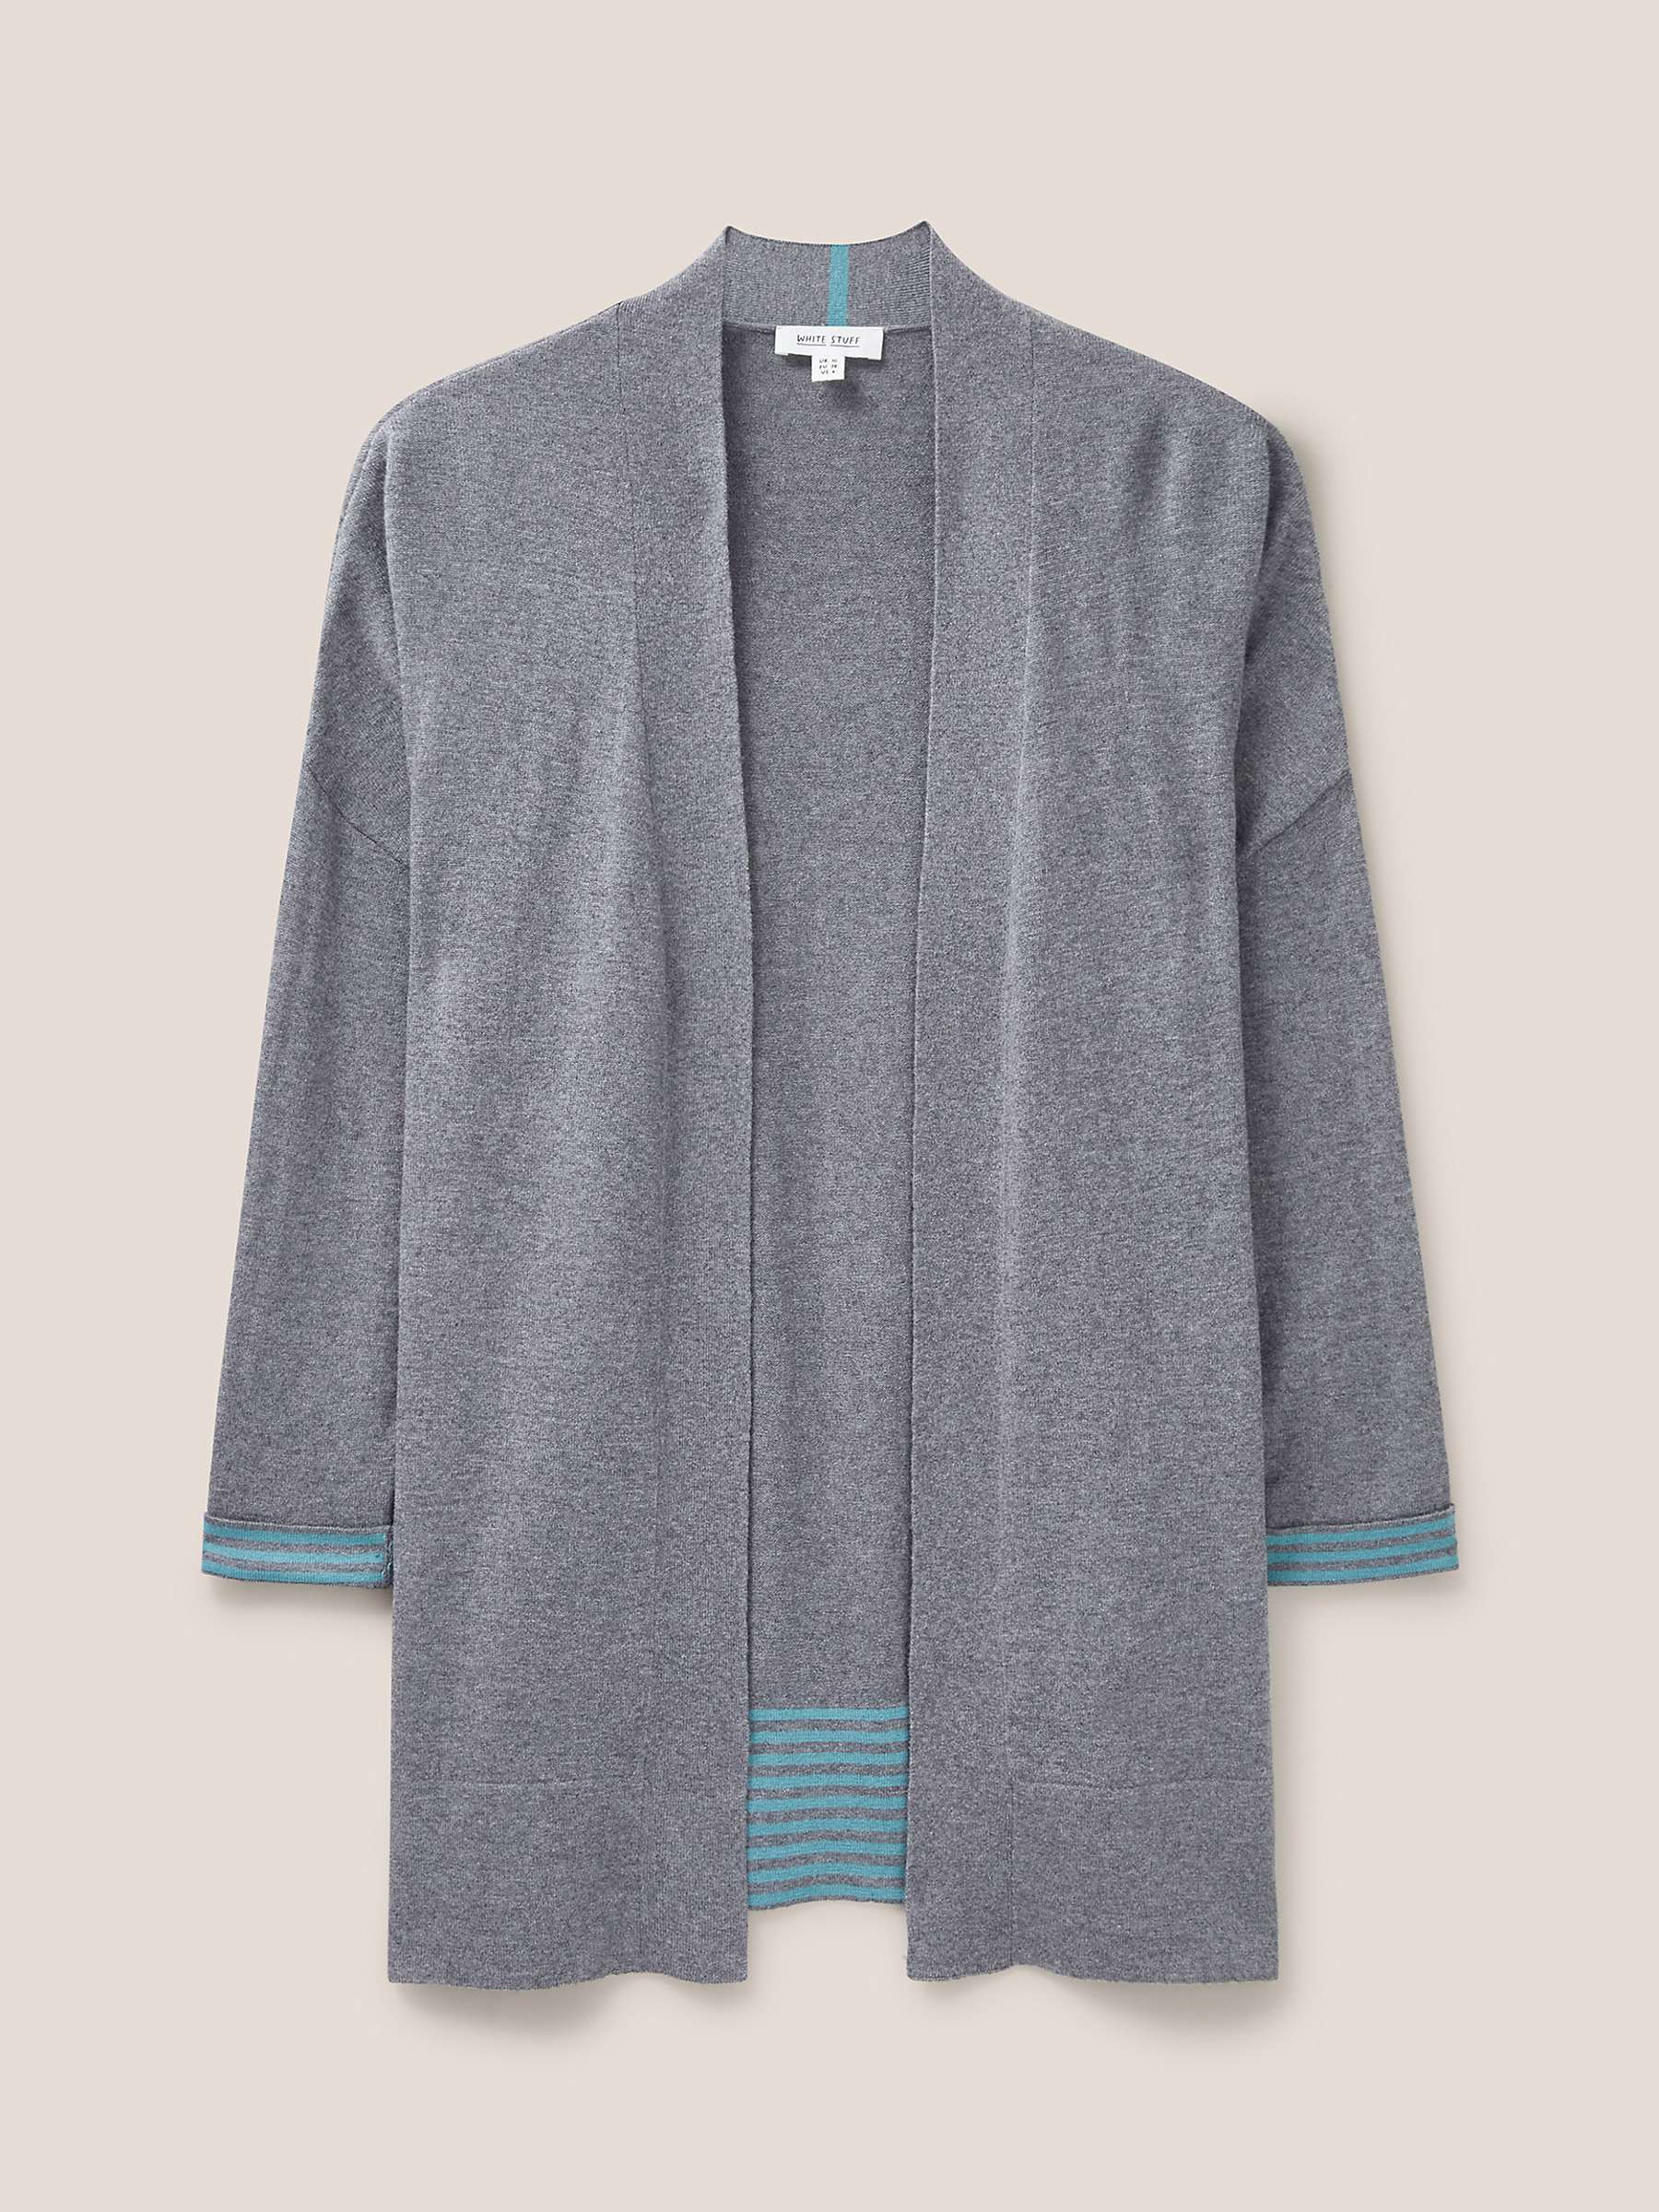 Buy White Stuff Laura Wool and Cotton Blend Cardigan, Grey Marl Online at johnlewis.com